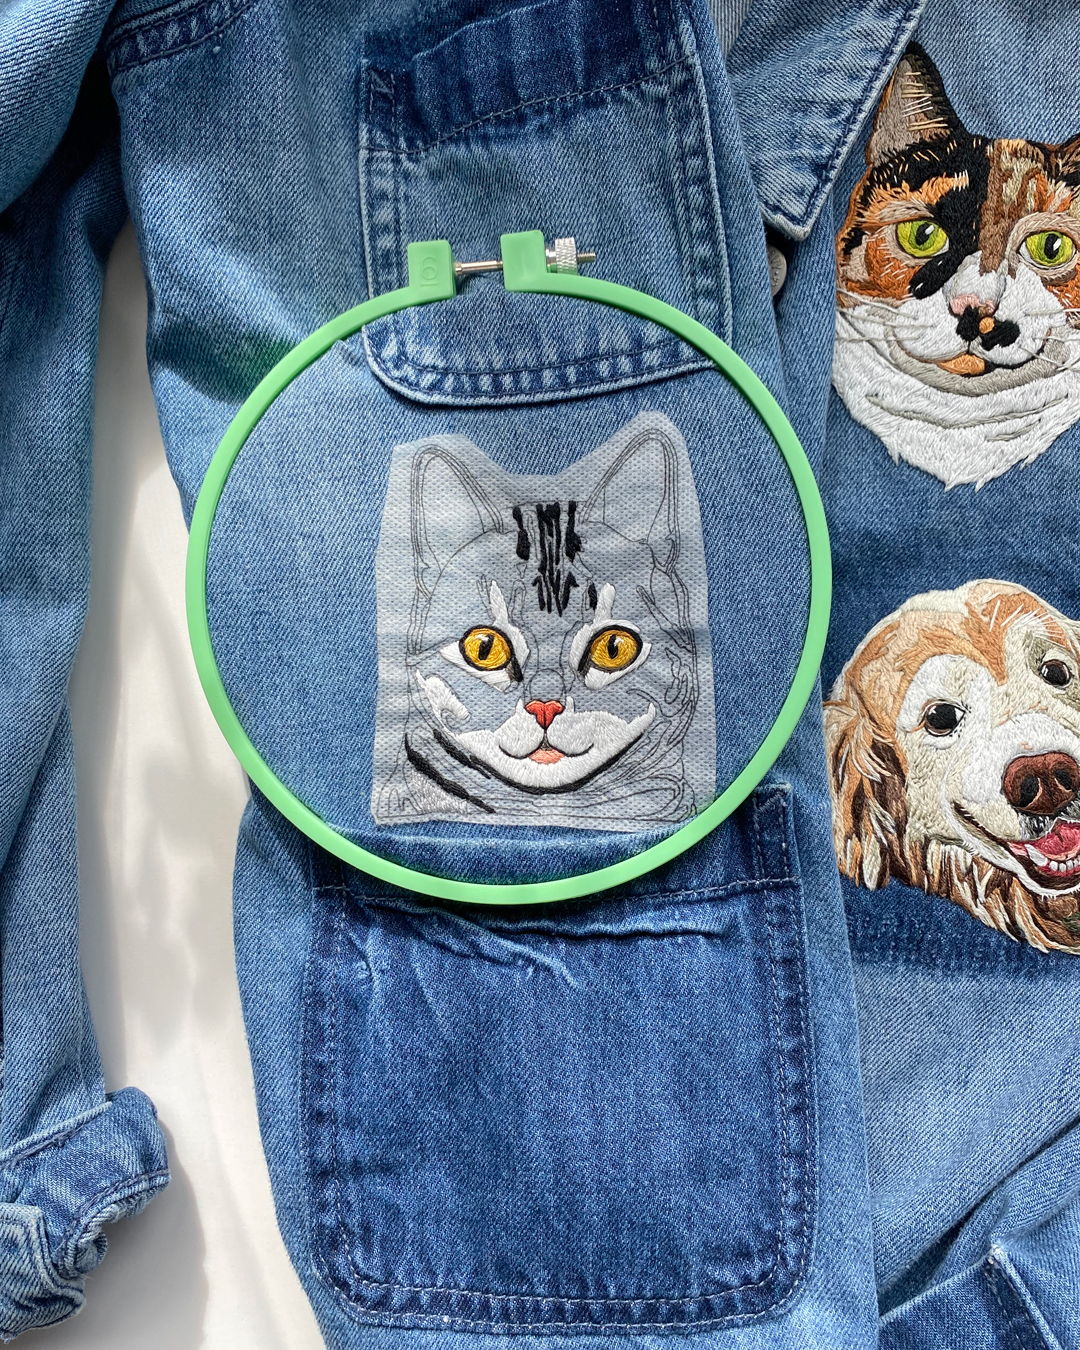 Cat embroidery on a jacket